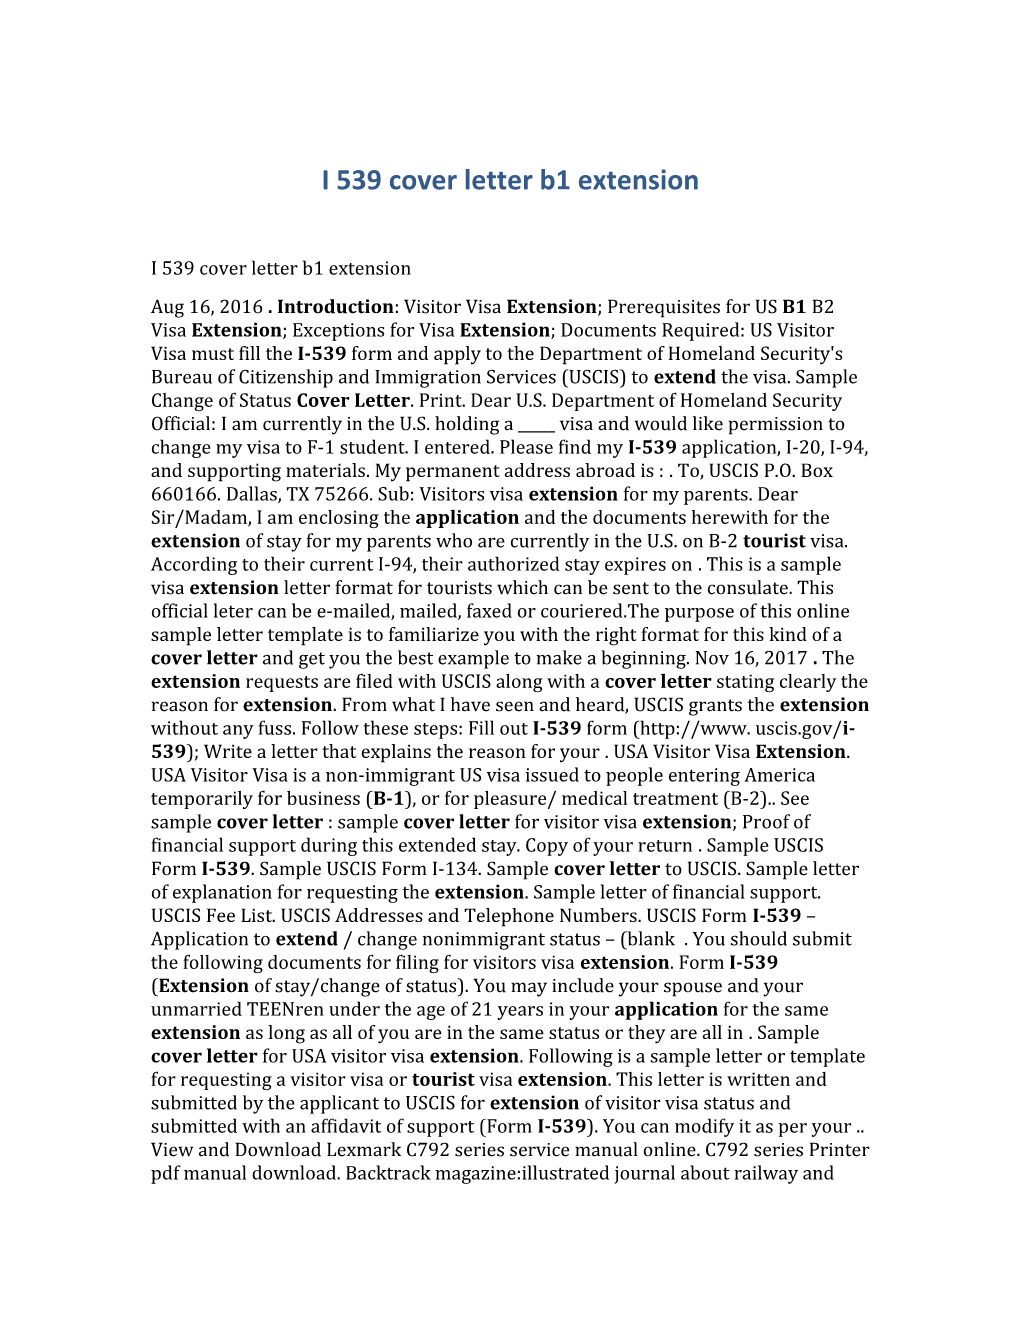 I 539 Cover Letter B1 Extension